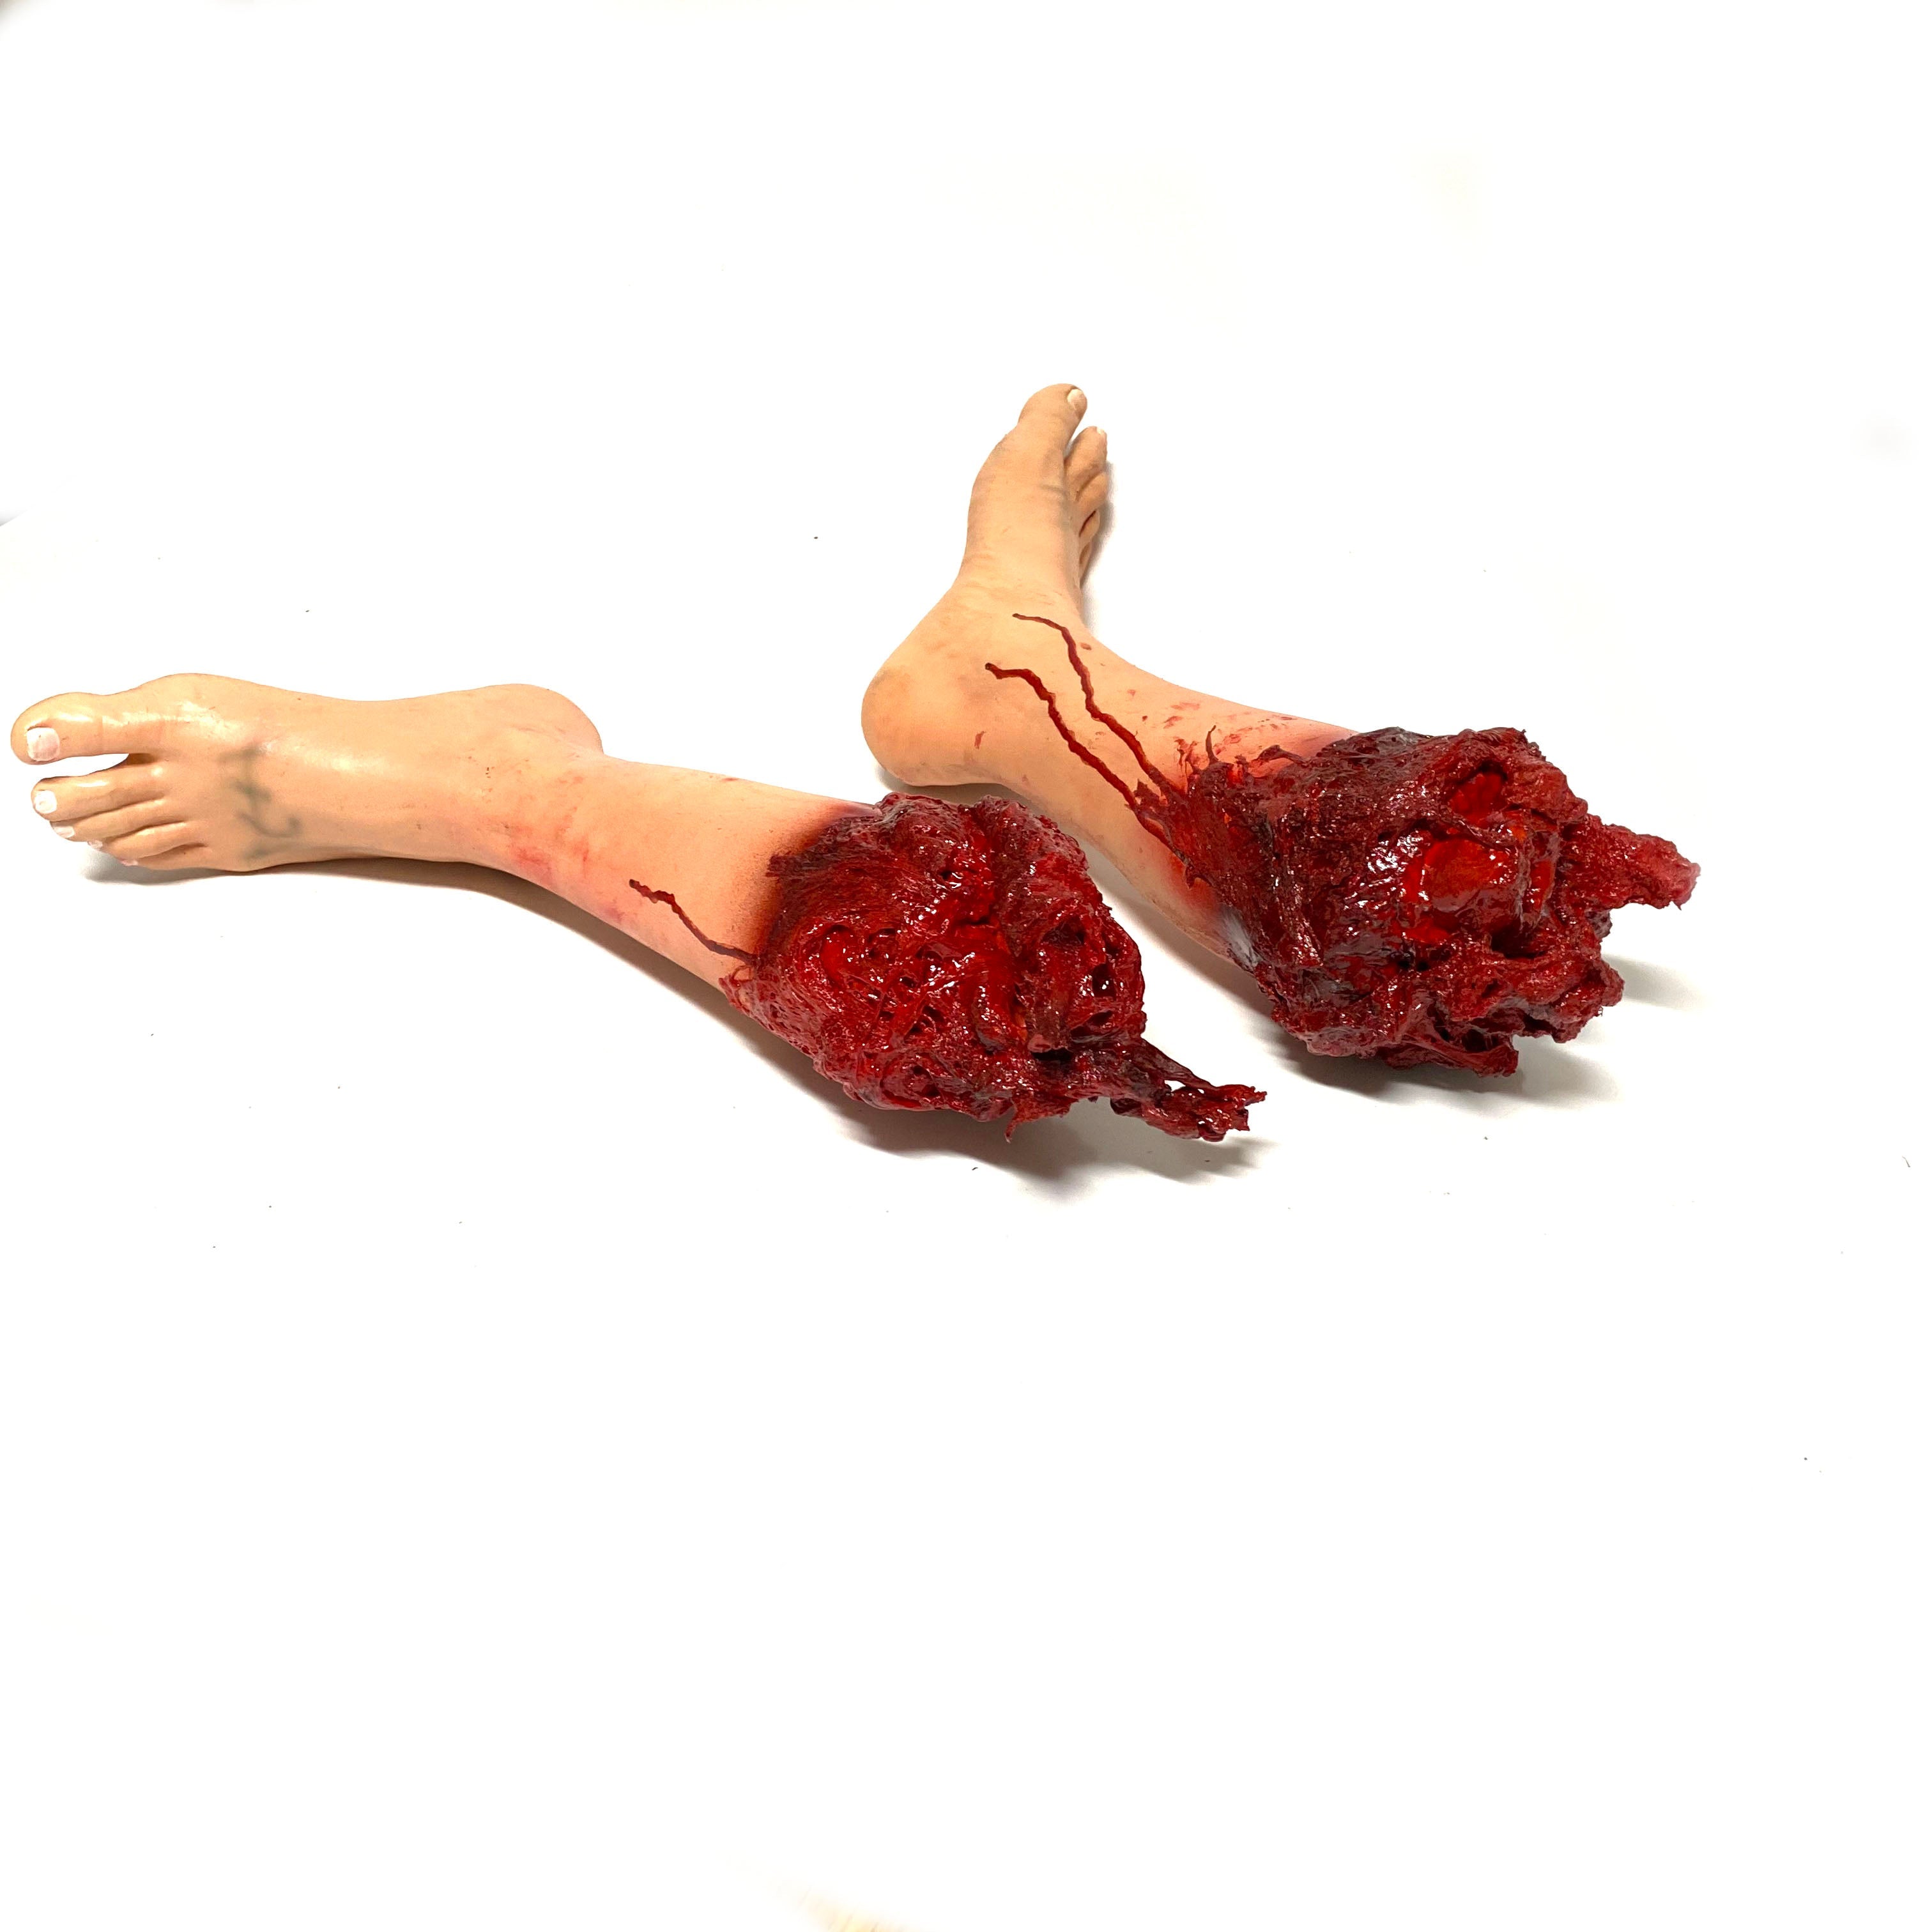 Severed Leg - Foam Rubber with Gore Effects - Pair - Both Legs